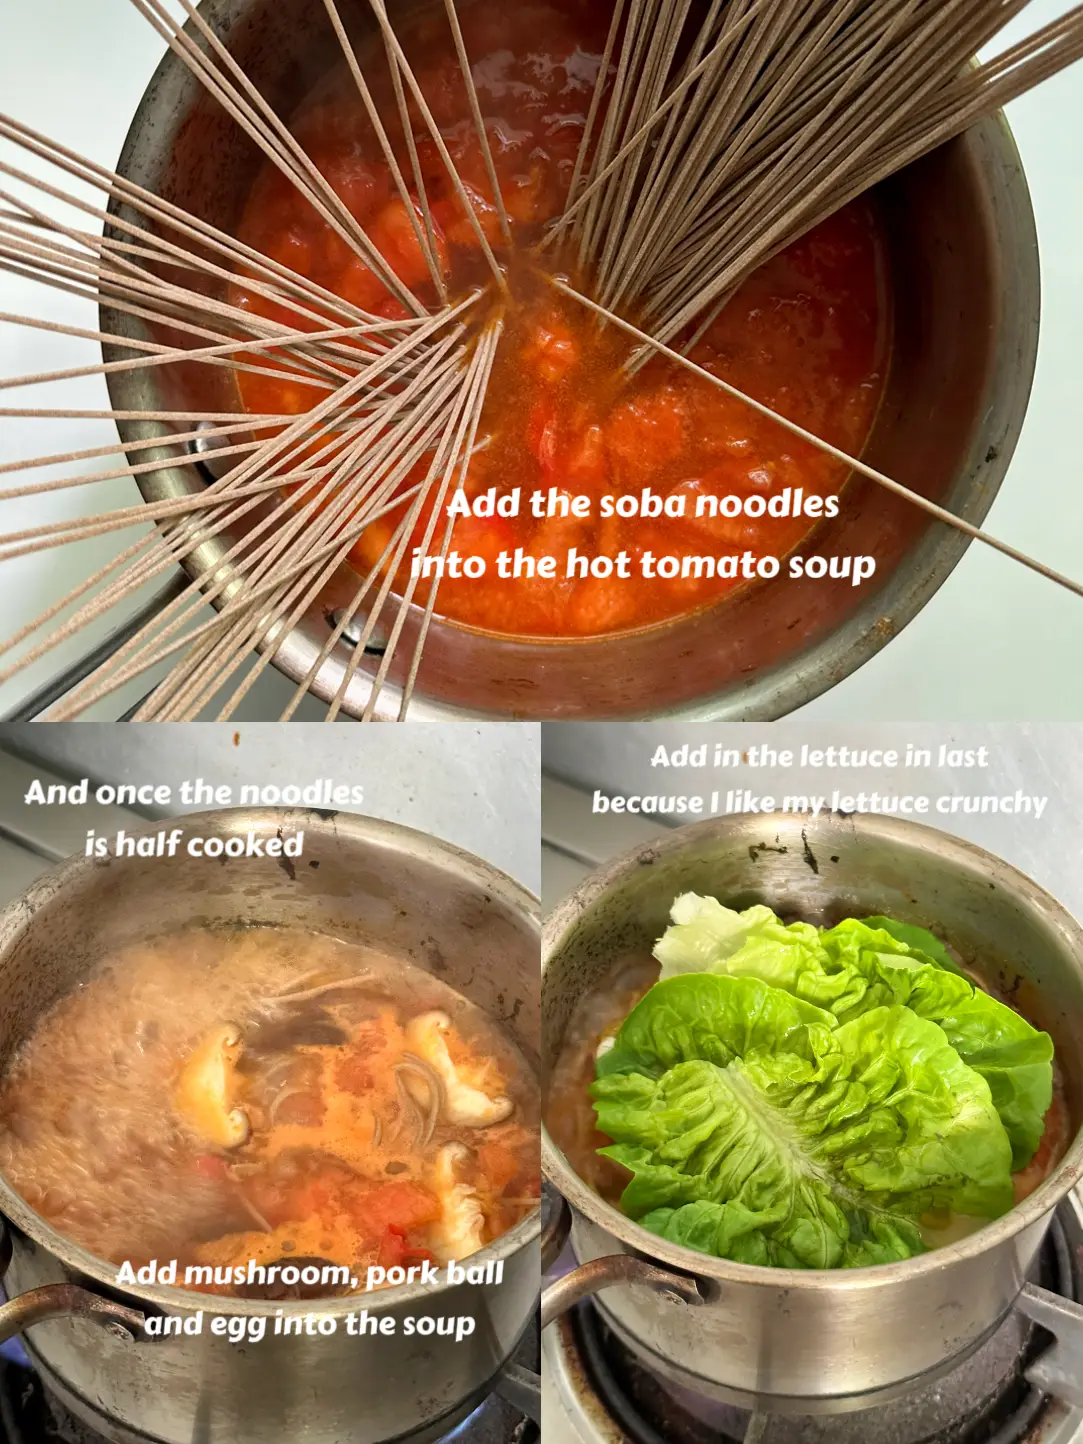 Easy yummy healthy tomato recipe (6 ingredients)'s images(3)